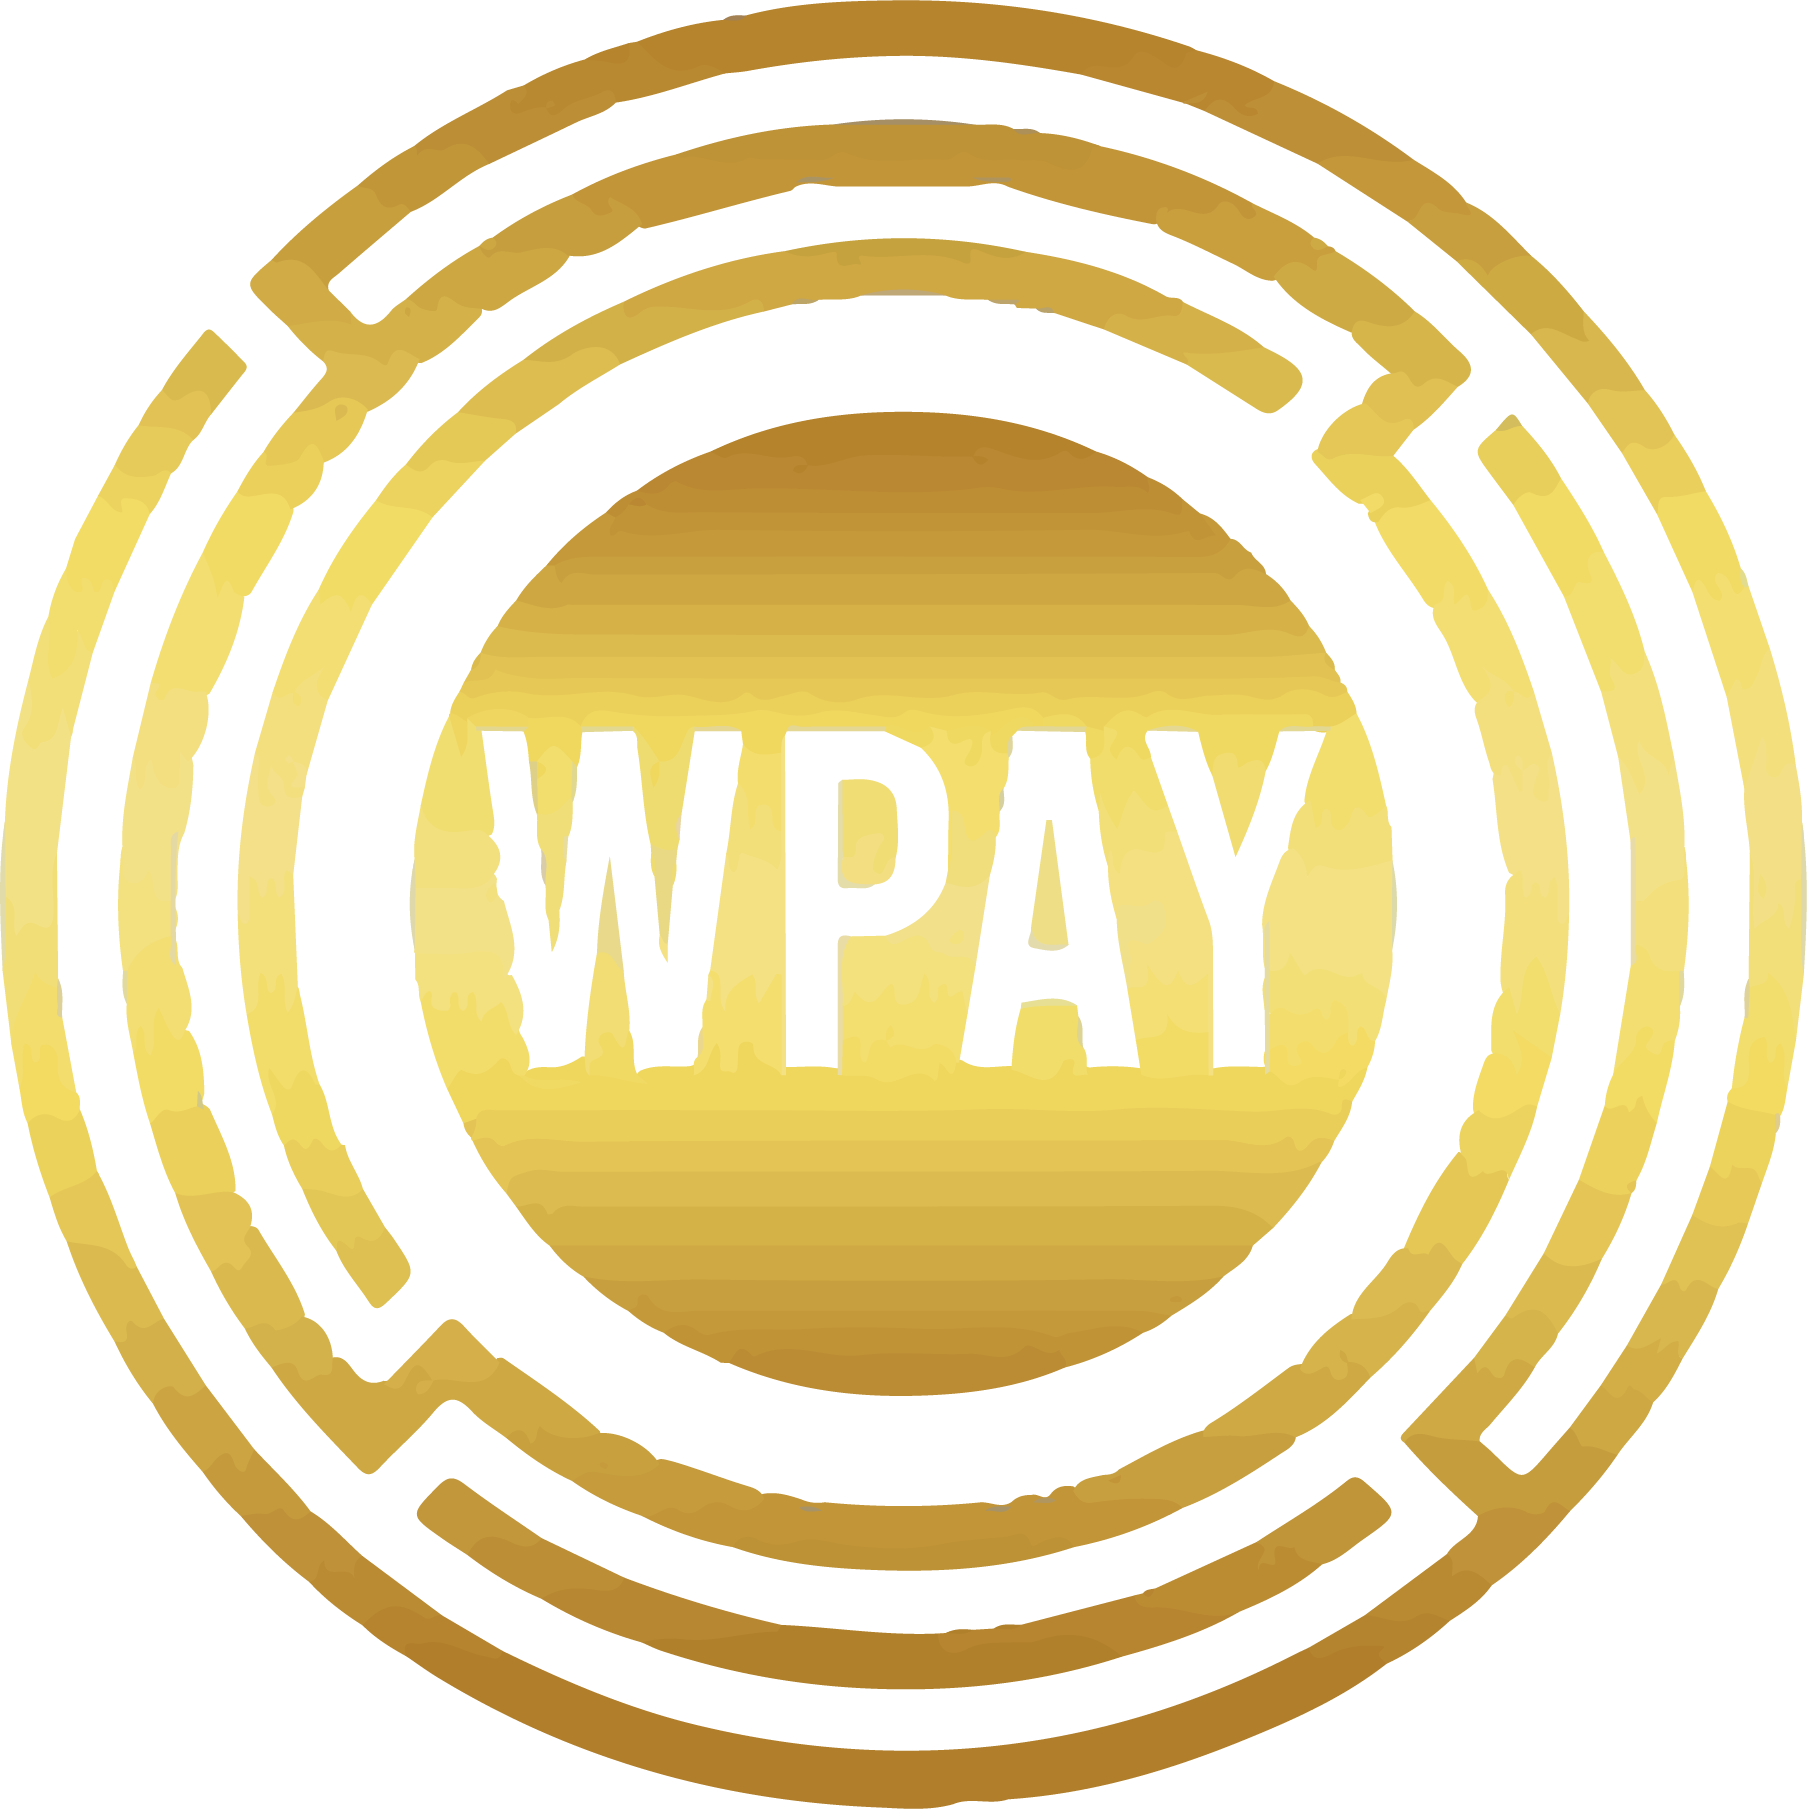 WPAY: Revolutionizing P2P Payments Through Cryptographic Proof